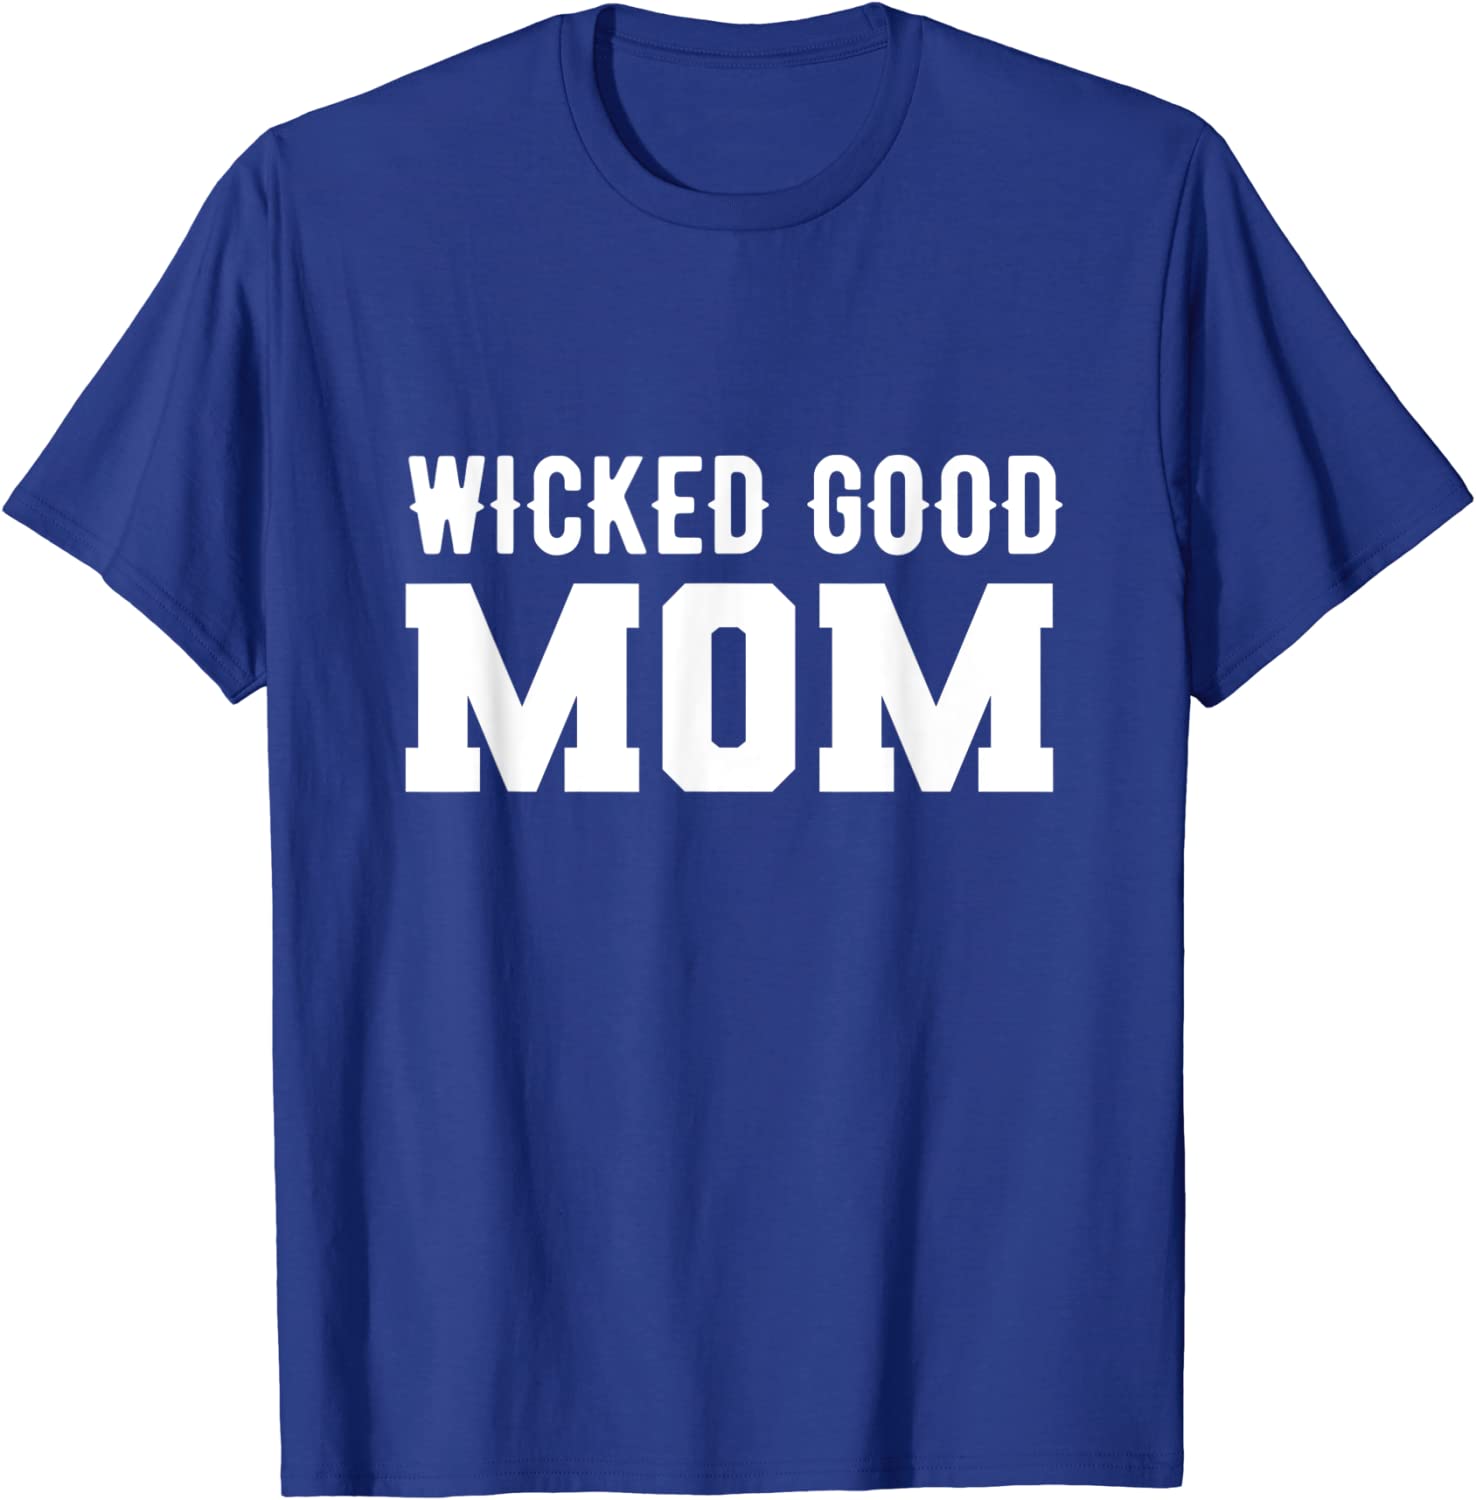 wicked good mom t-shirt